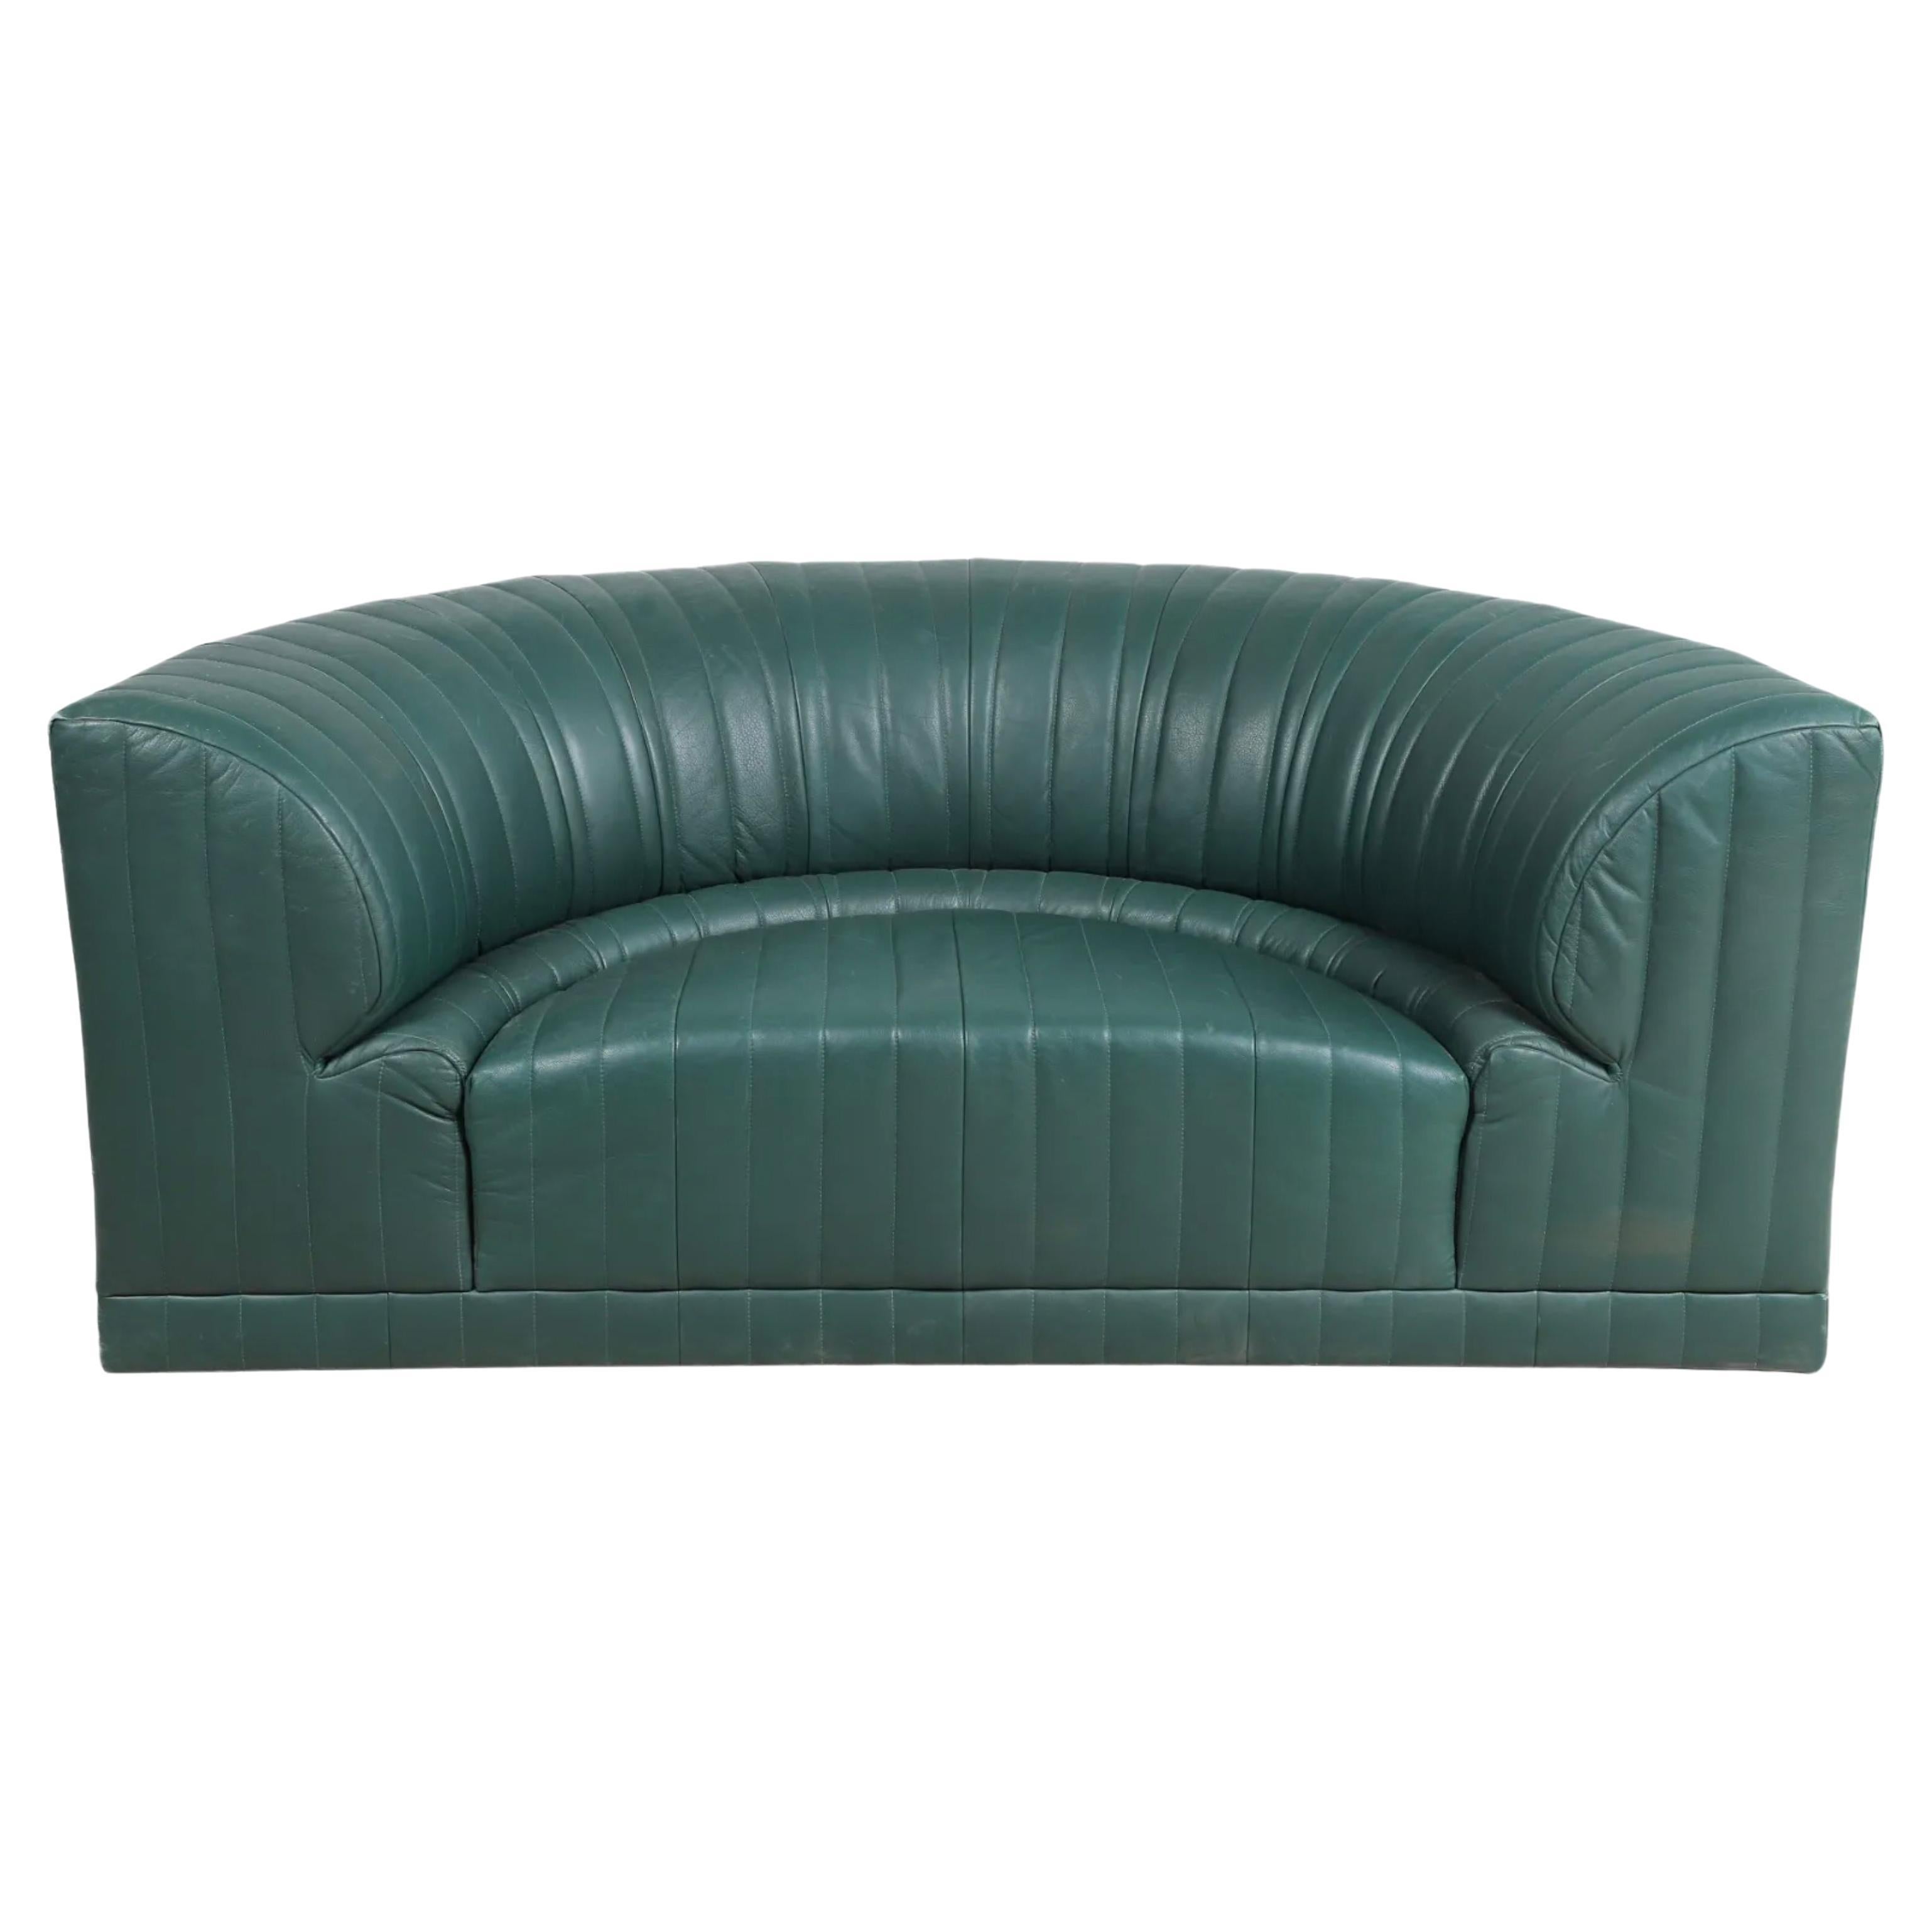 Post Modern Half Round Section of Roche Bobois Green Leather Sofa 1983